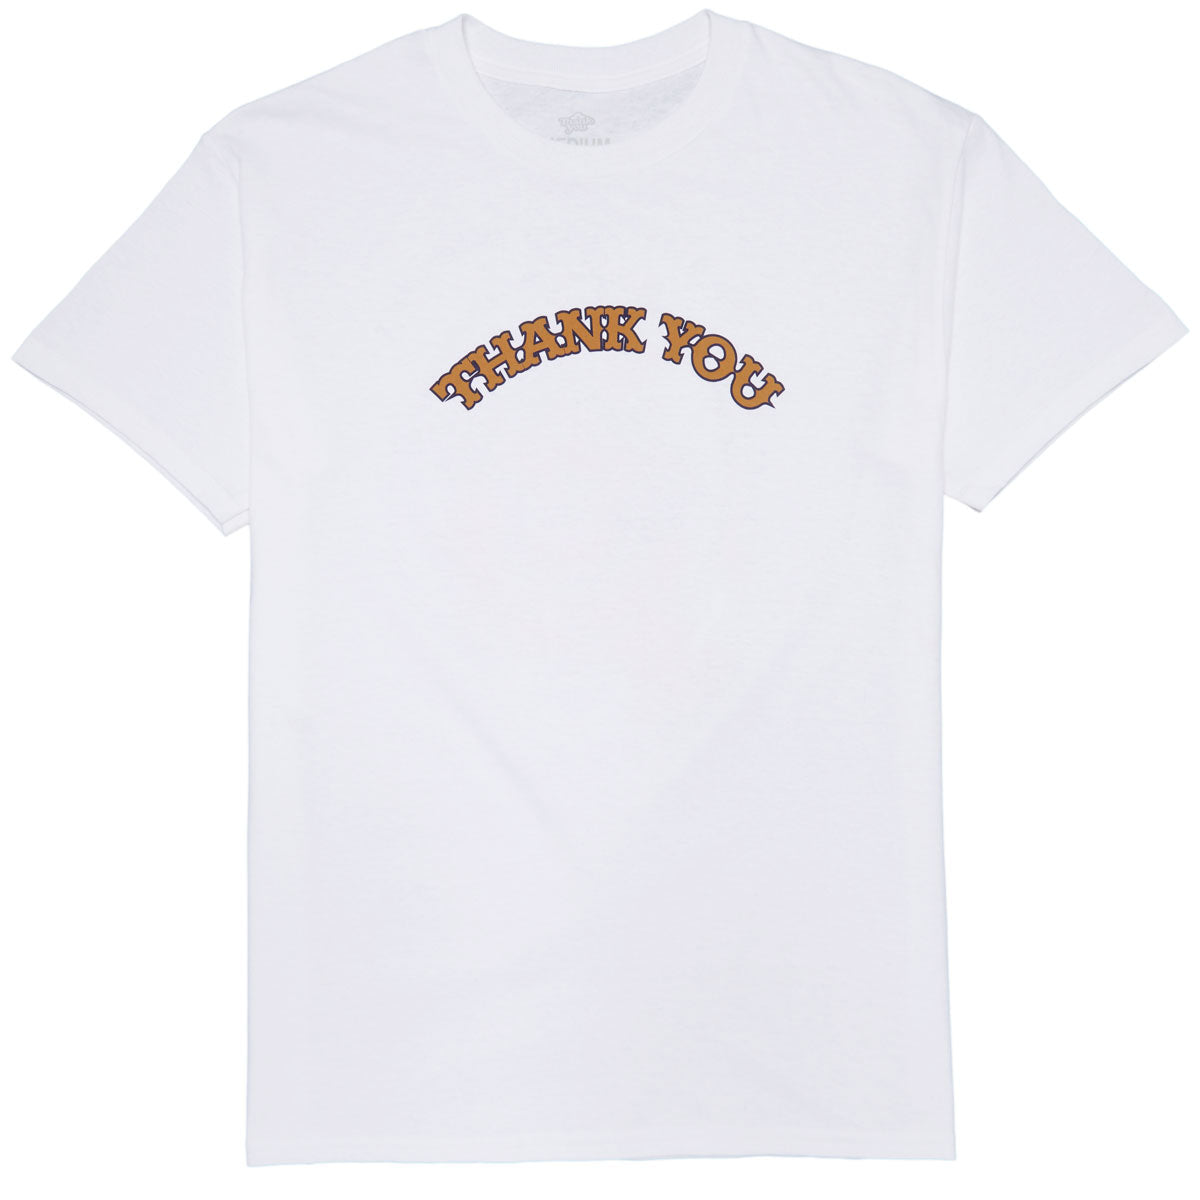 Thank You Roll Up T-Shirt - White image 2